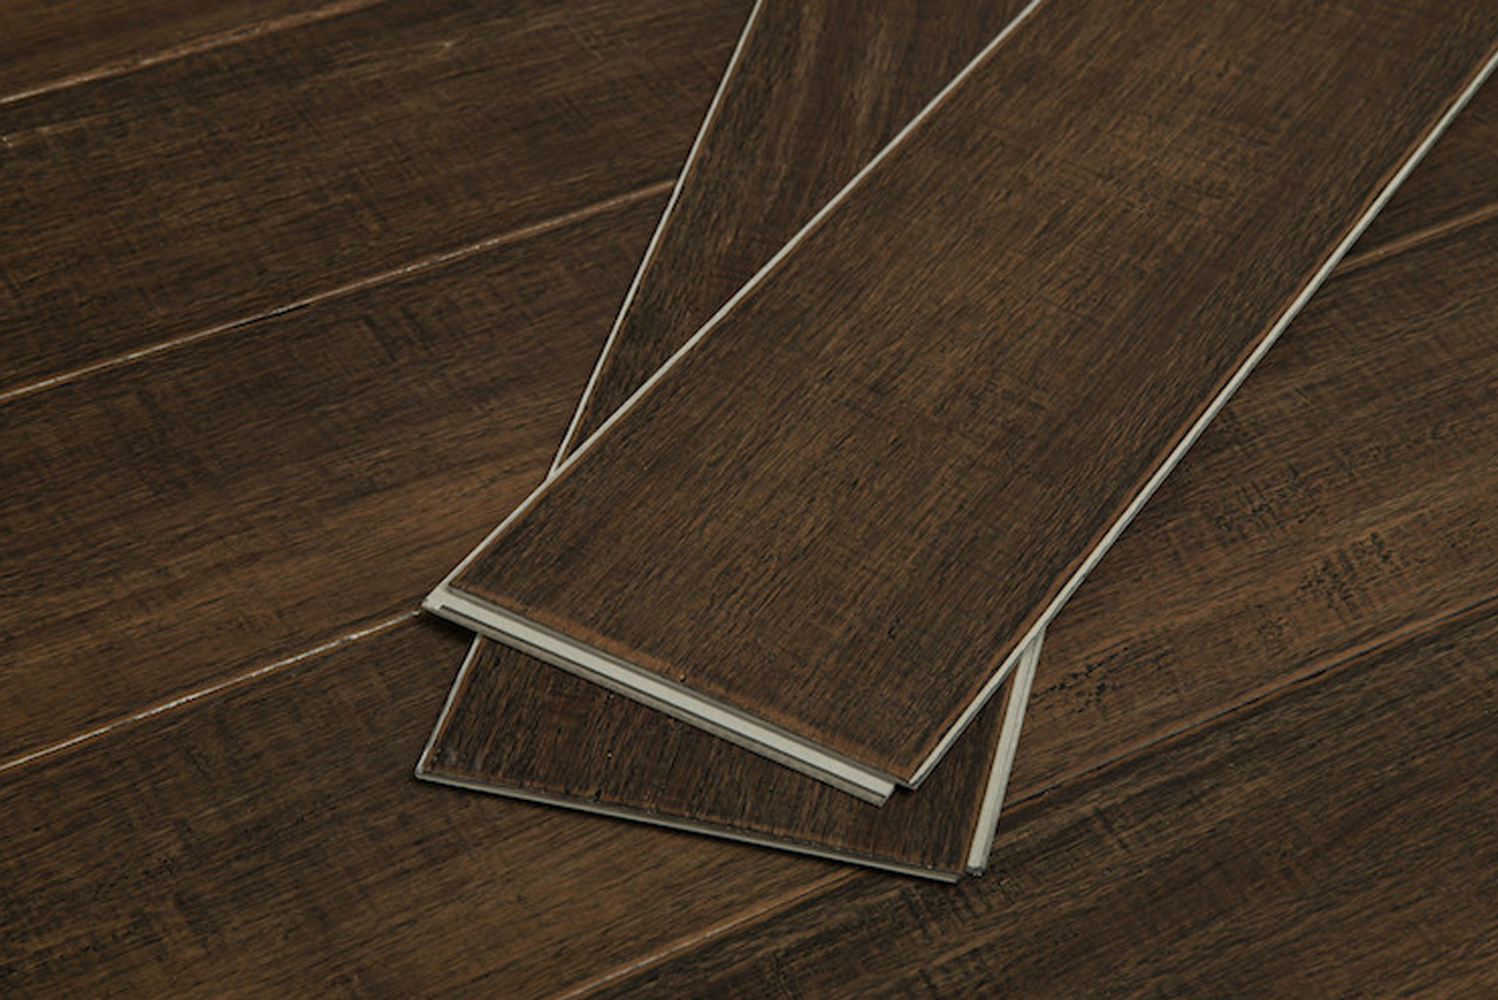 Cali Bamboo launched a new hardwood flooring option 